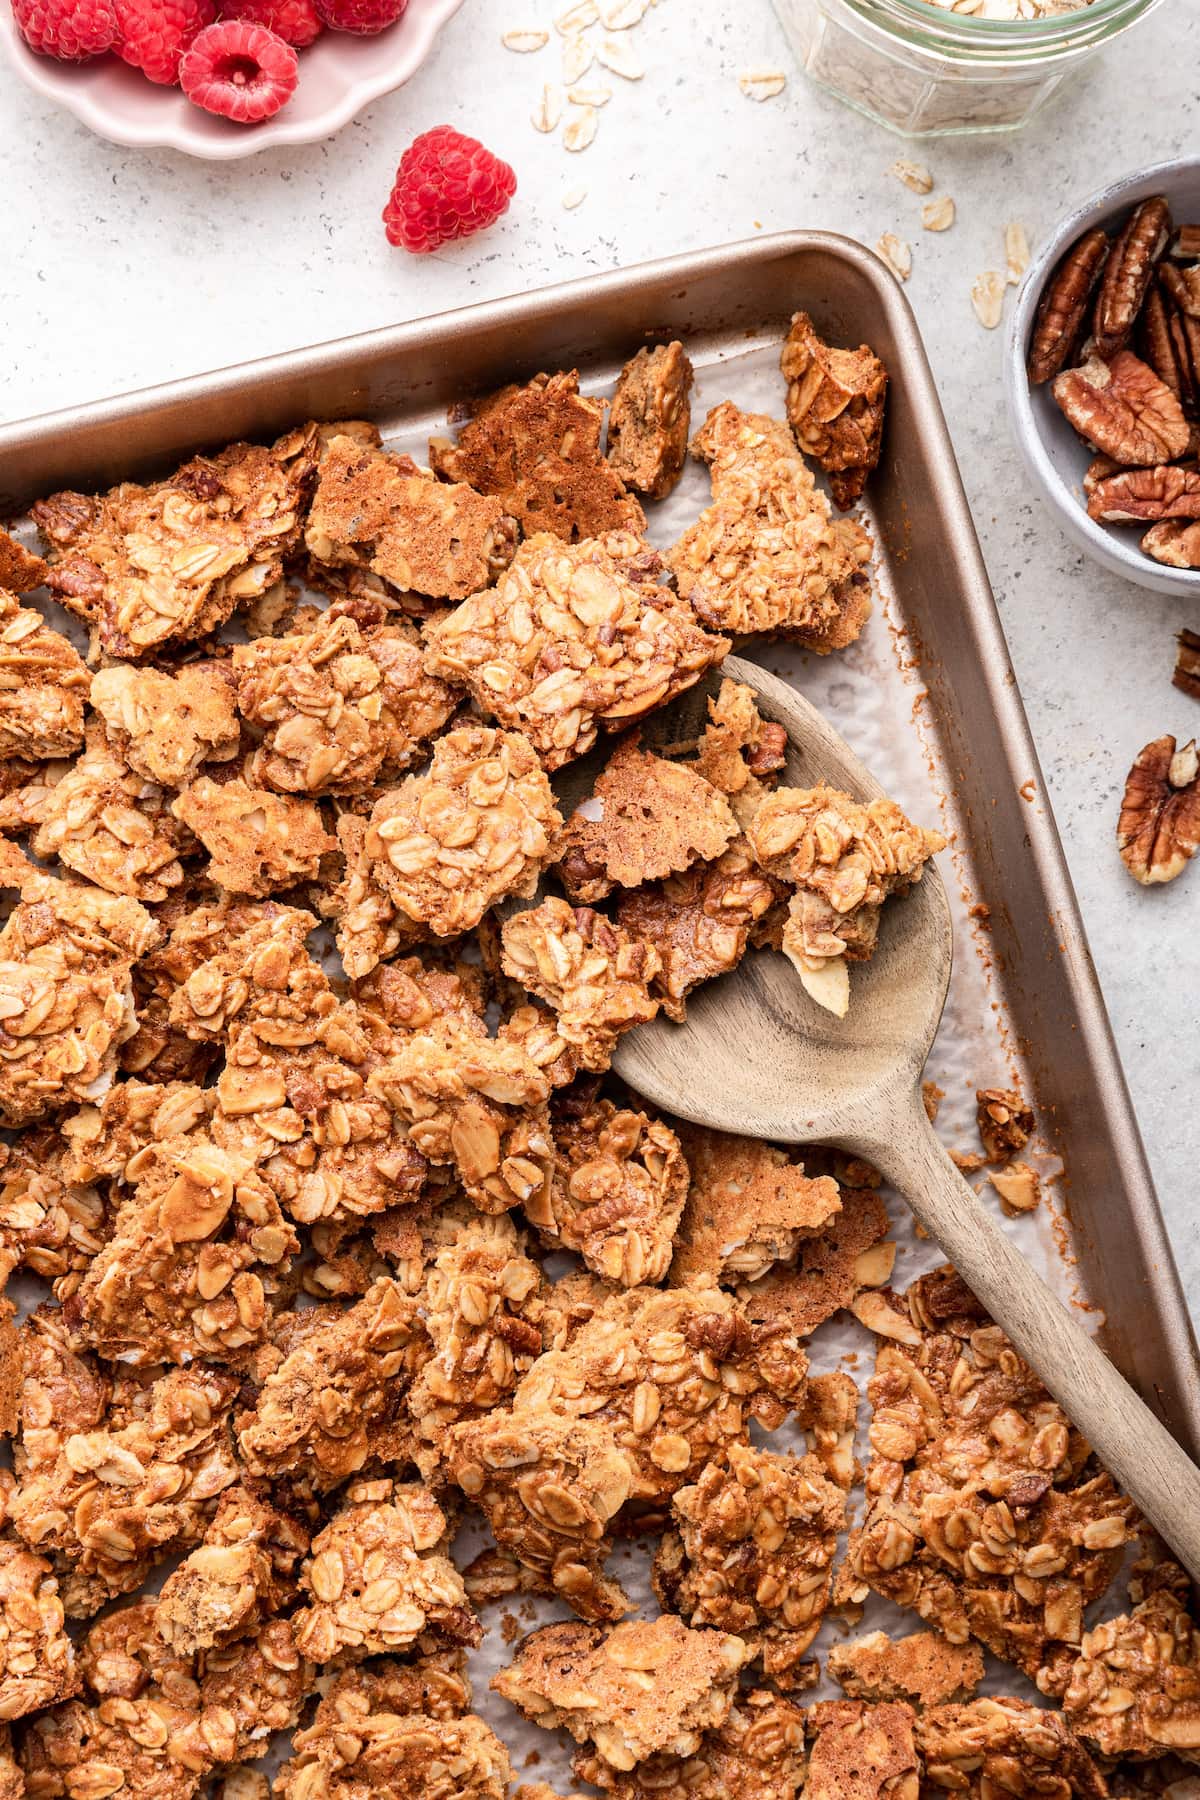 Protein granola on a baking tray with a wooden serving spoon.